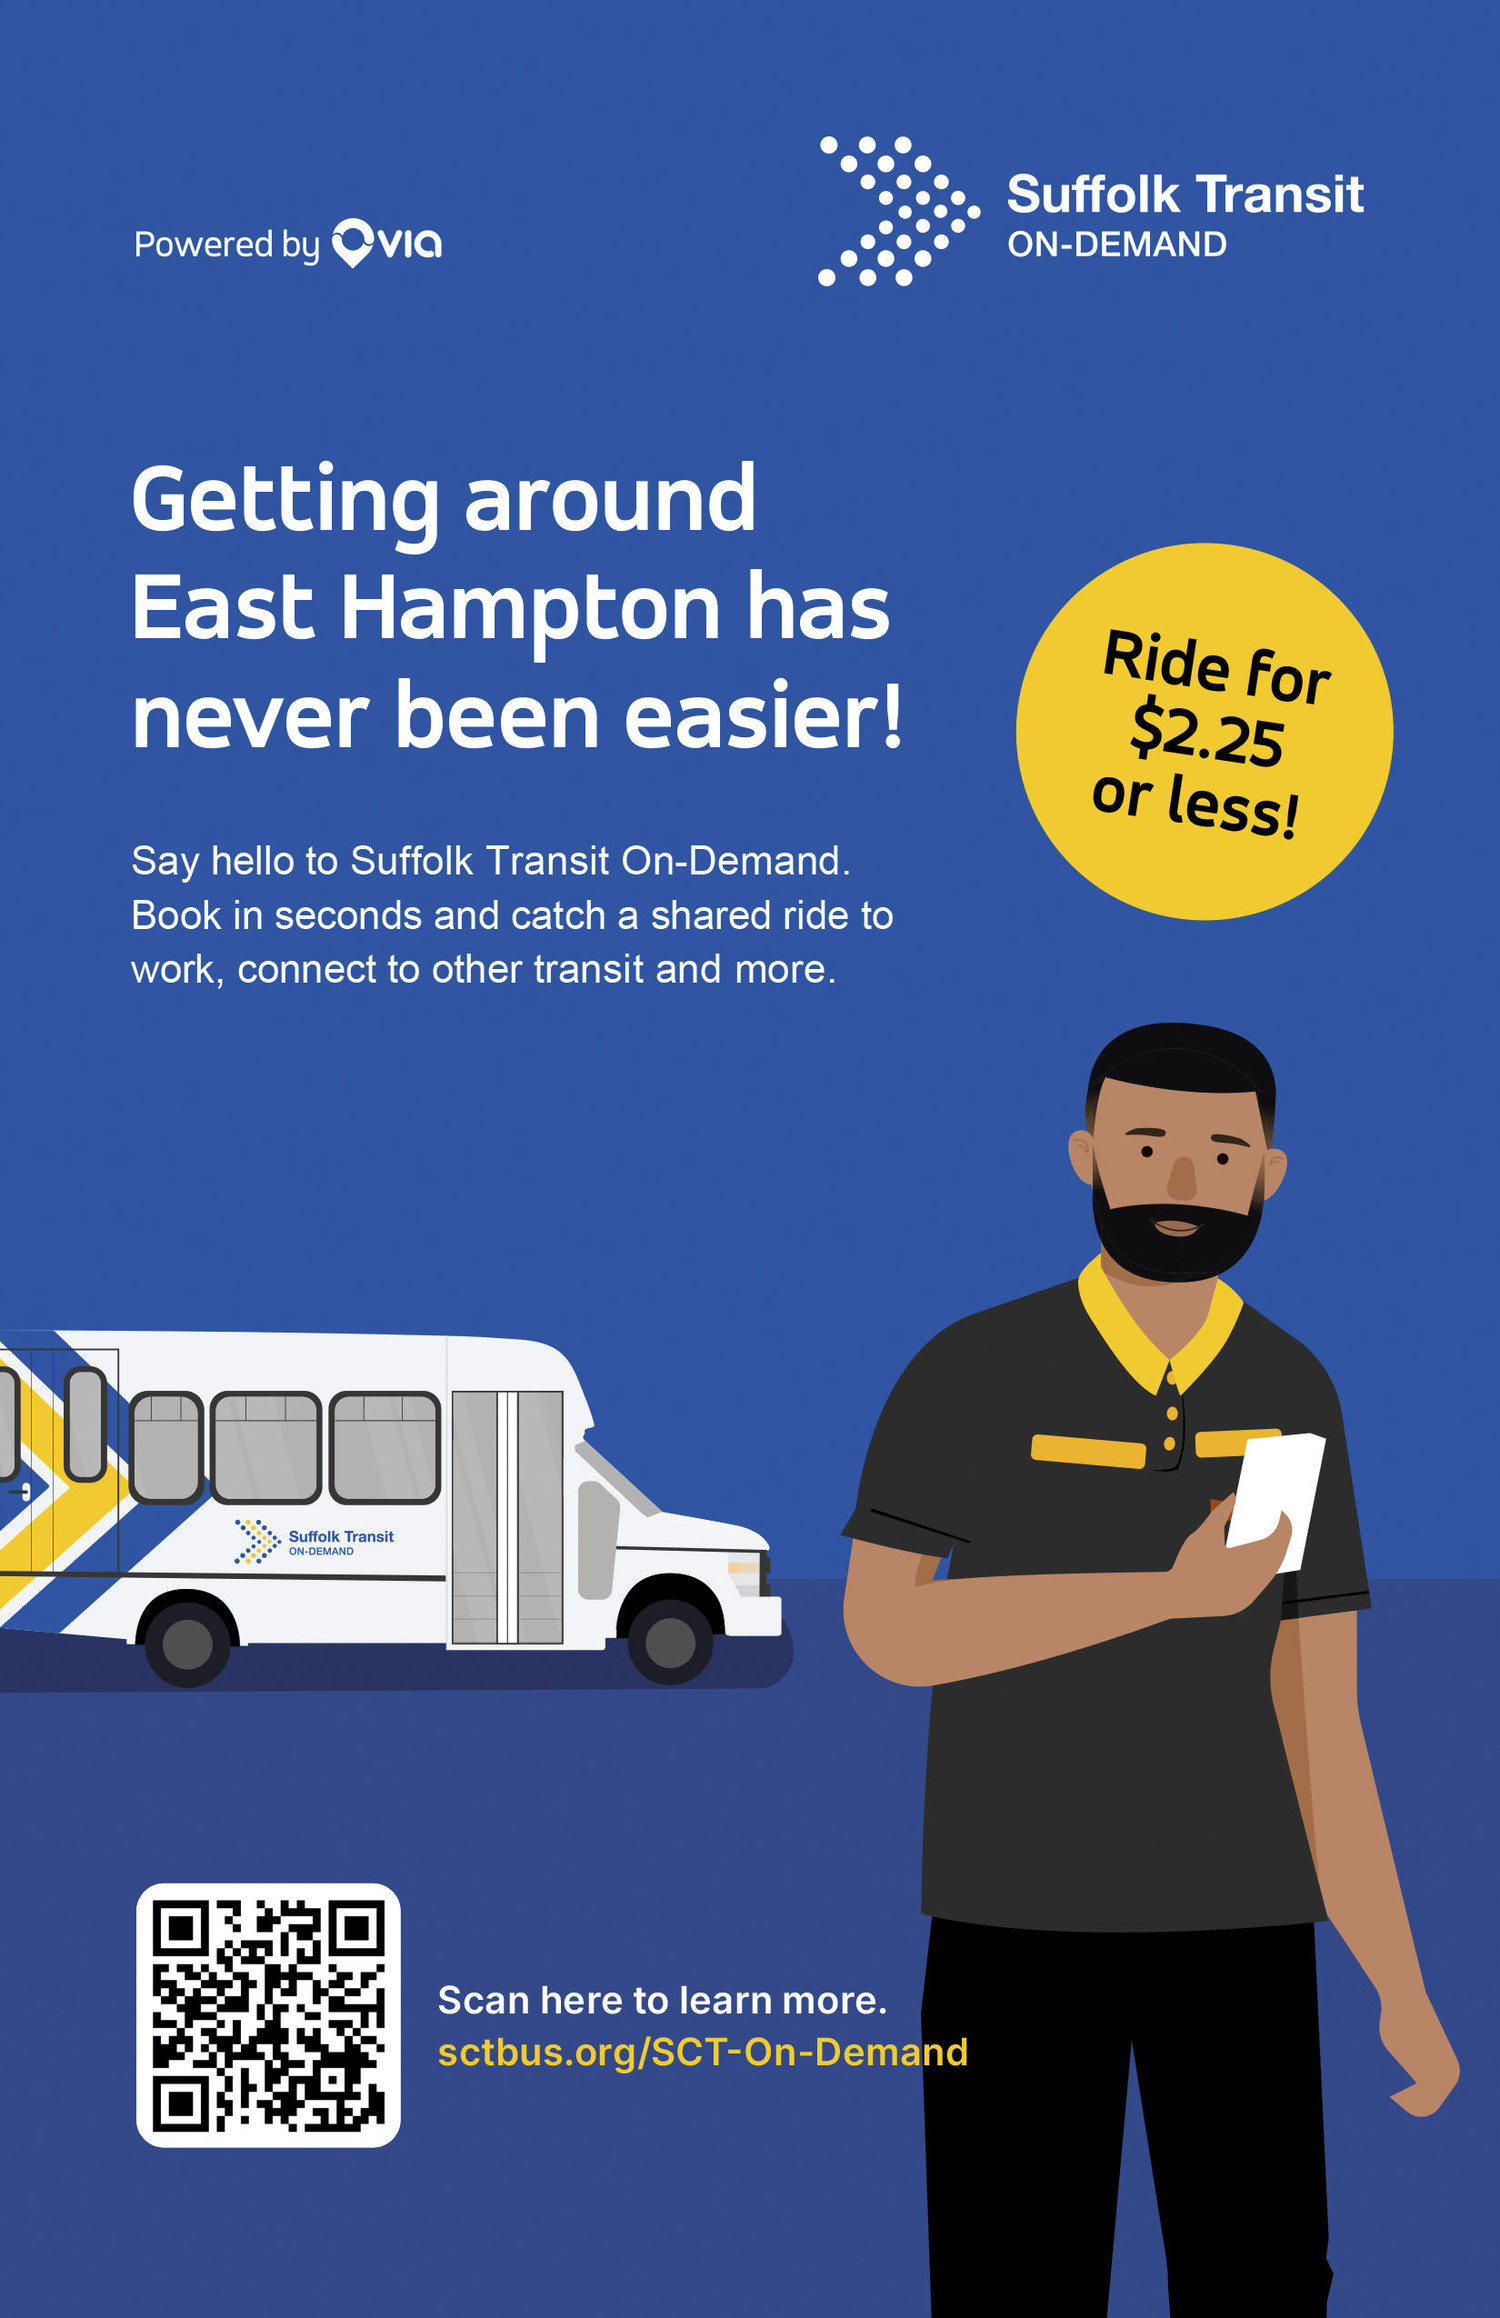 On-demand public bus service begins in East Hampton next week. Shoot the QR code in this graphic to get the mobile app to hail and pay for bus rides almost anywhere in East Hampton.